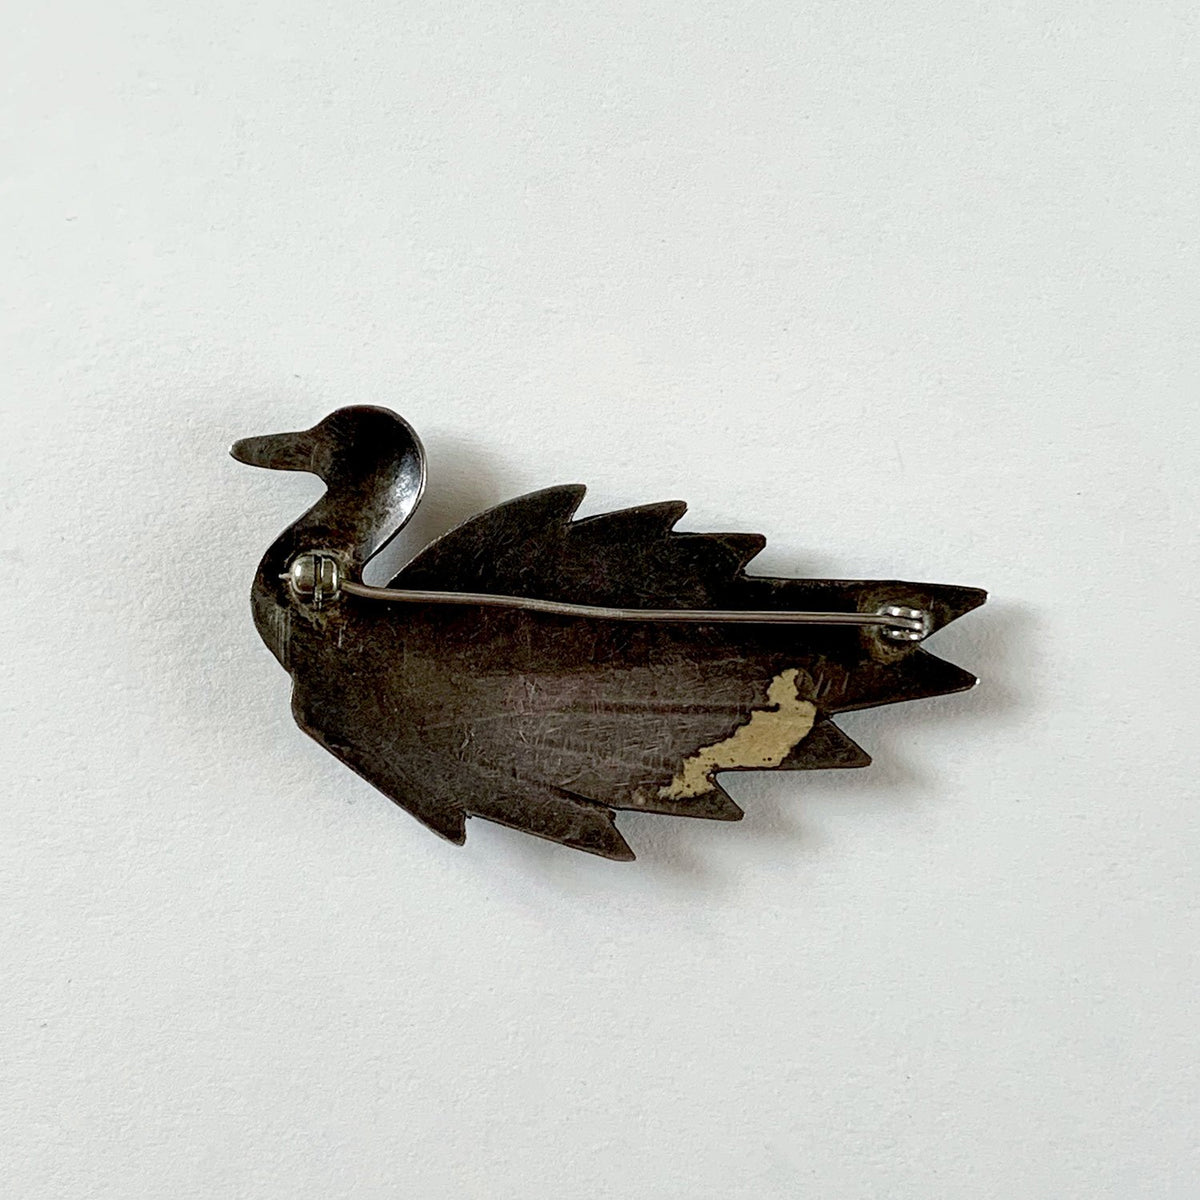 Vintage Sterling Swan Pin with Turquoise